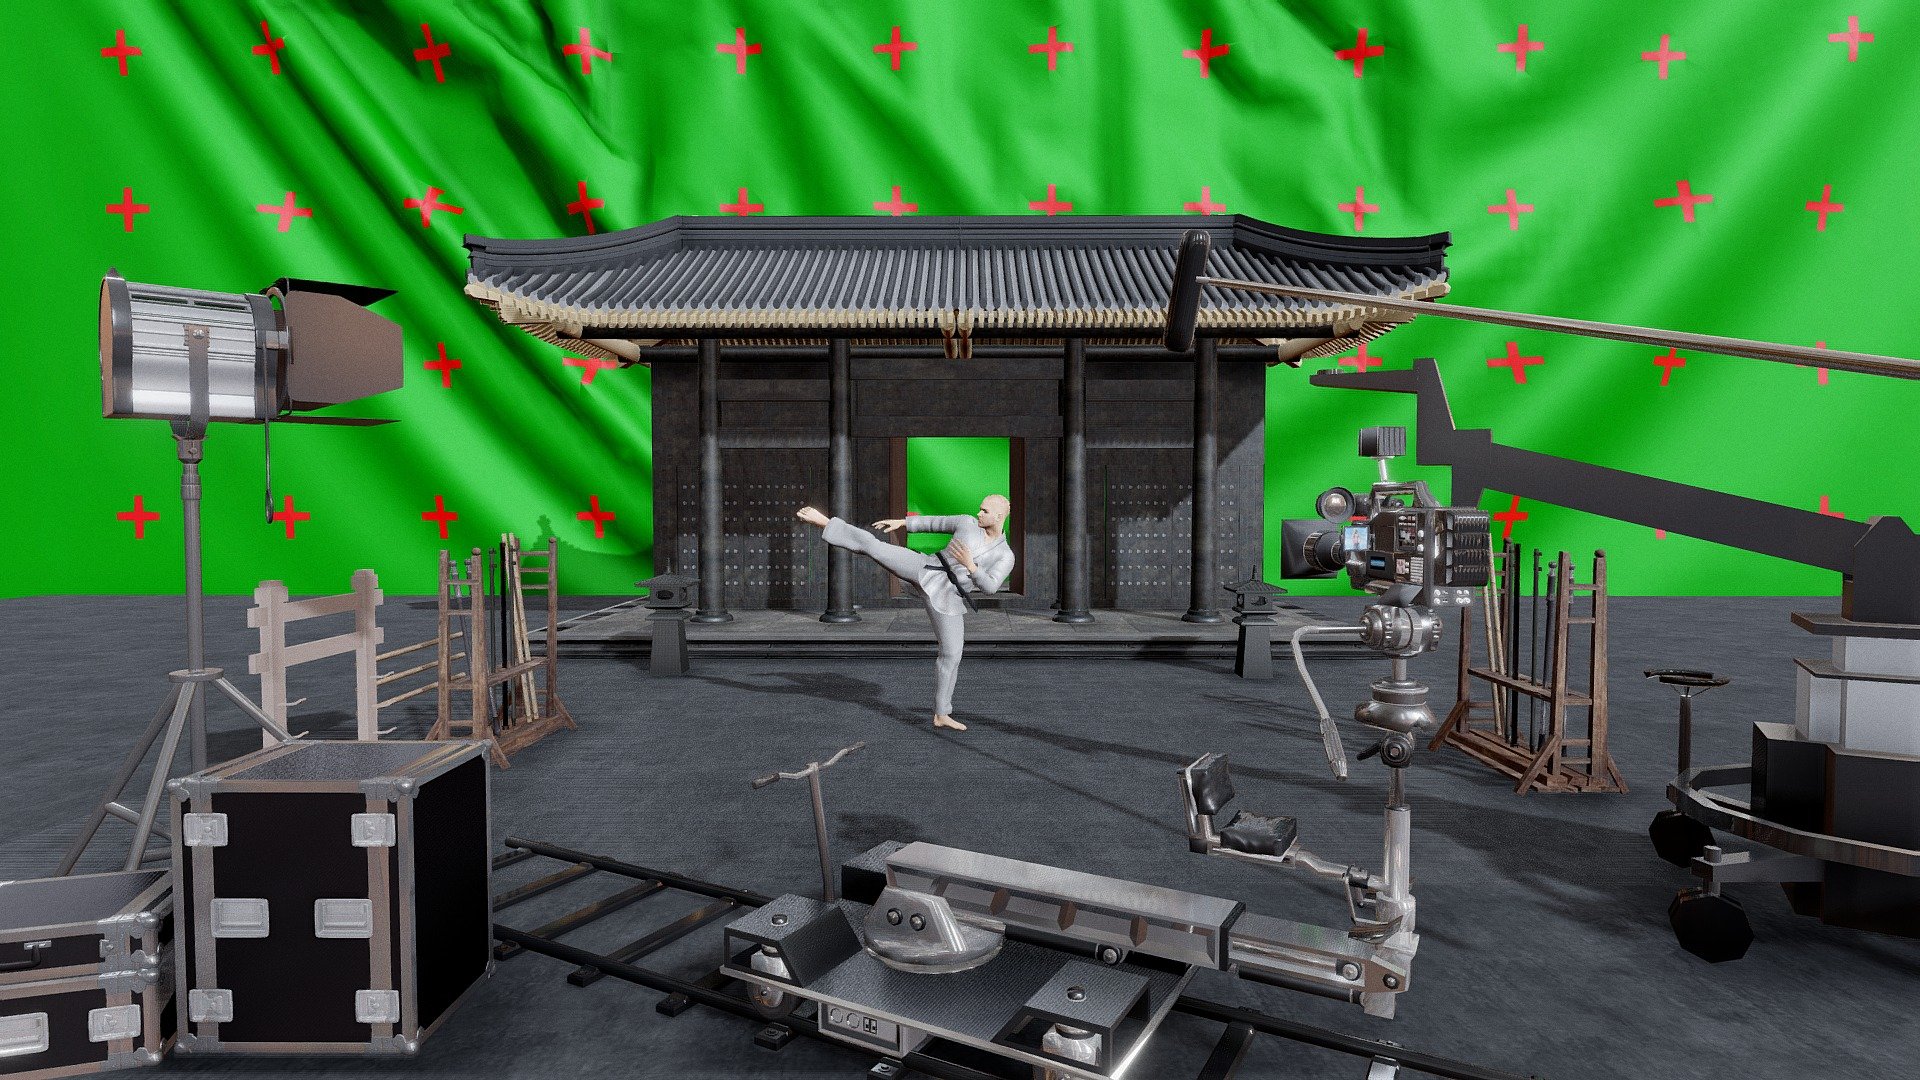 There are some difficult moves in kungfu. But if you don't give up and practice regularly with proper guidance you can learn it faster 3d model